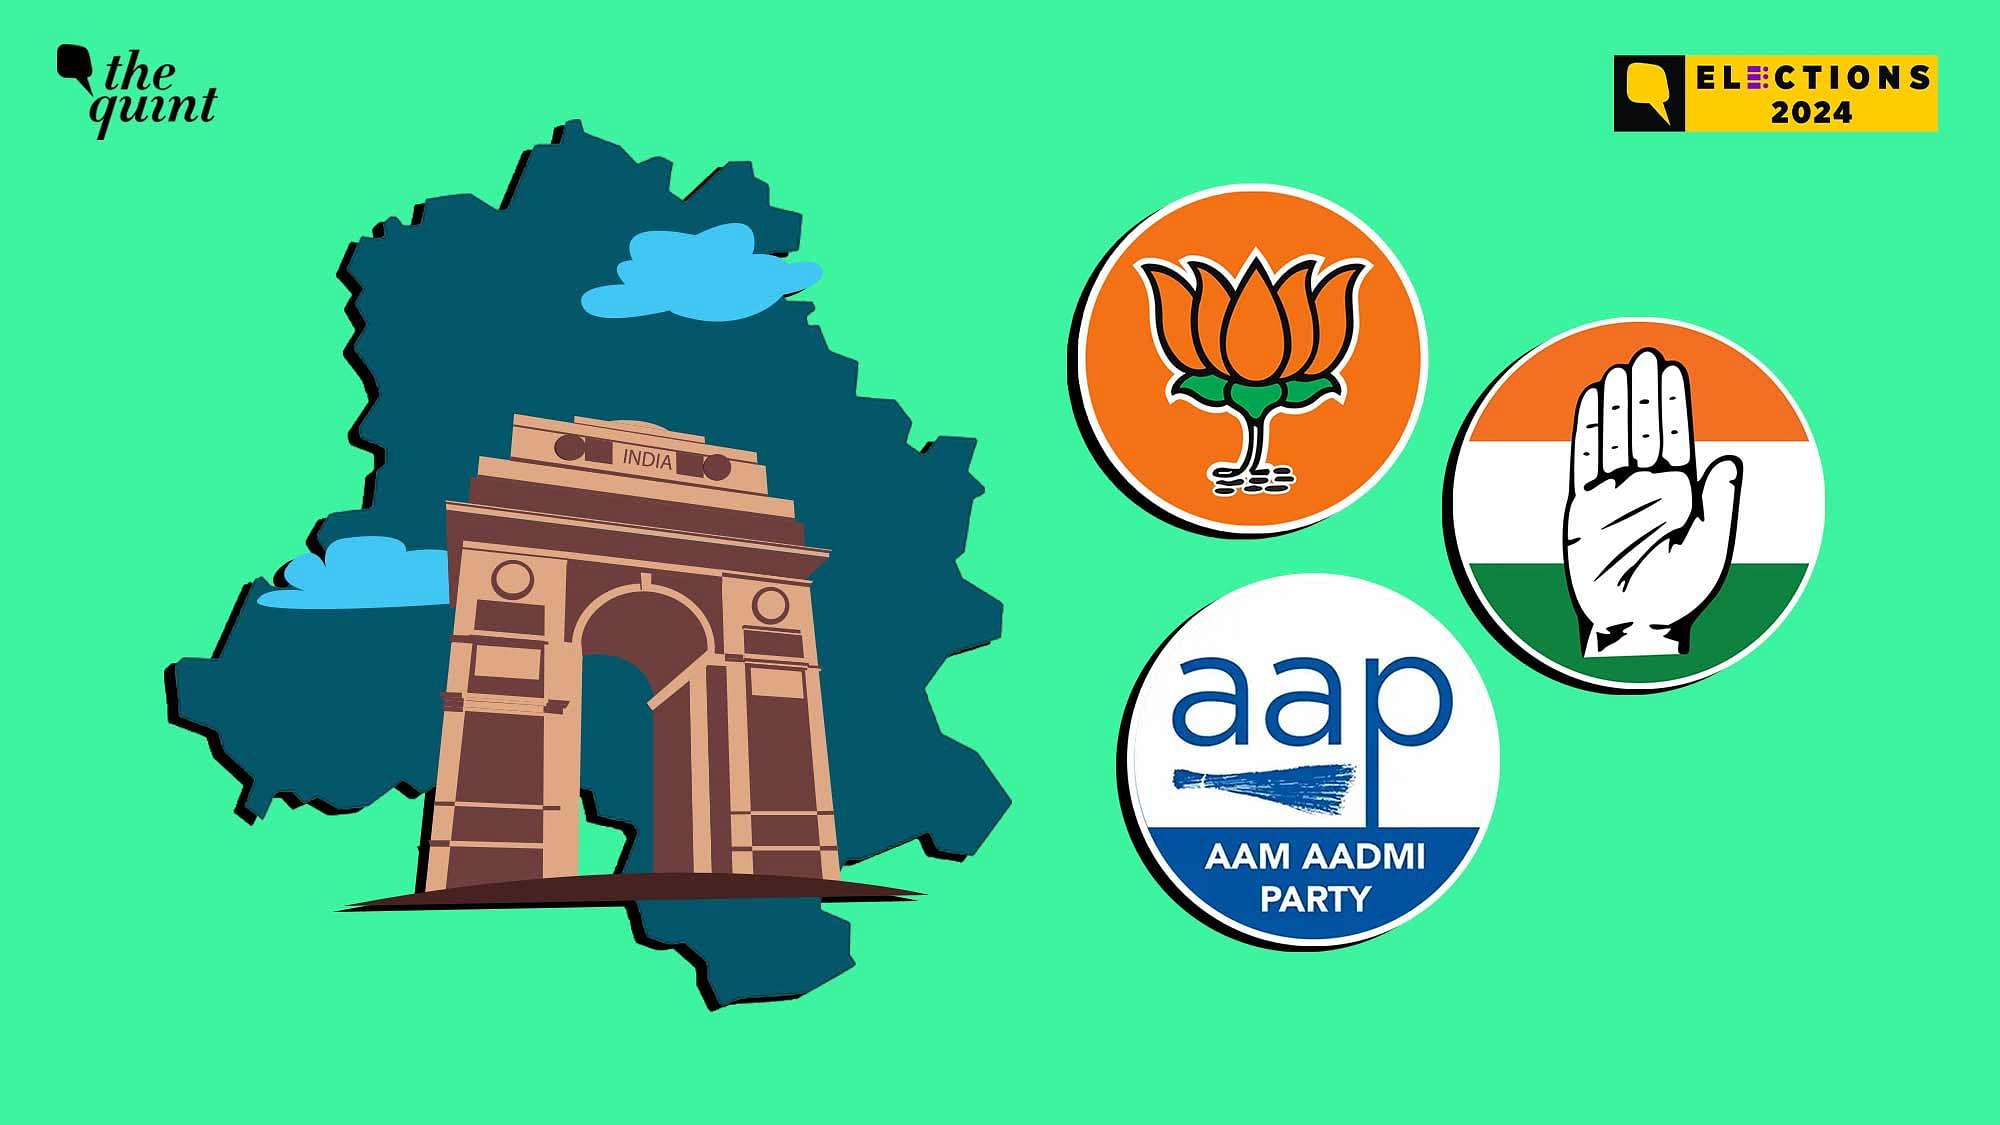 <div class="paragraphs"><p>While the BJP and Bahujan Samaj Party (BSP) had fielded candidates in all seven constituencies, Congress and the Aam Aadmi Party (AAP) fought the elections together with the former contesting on three seats and the latter on four seats.</p></div>